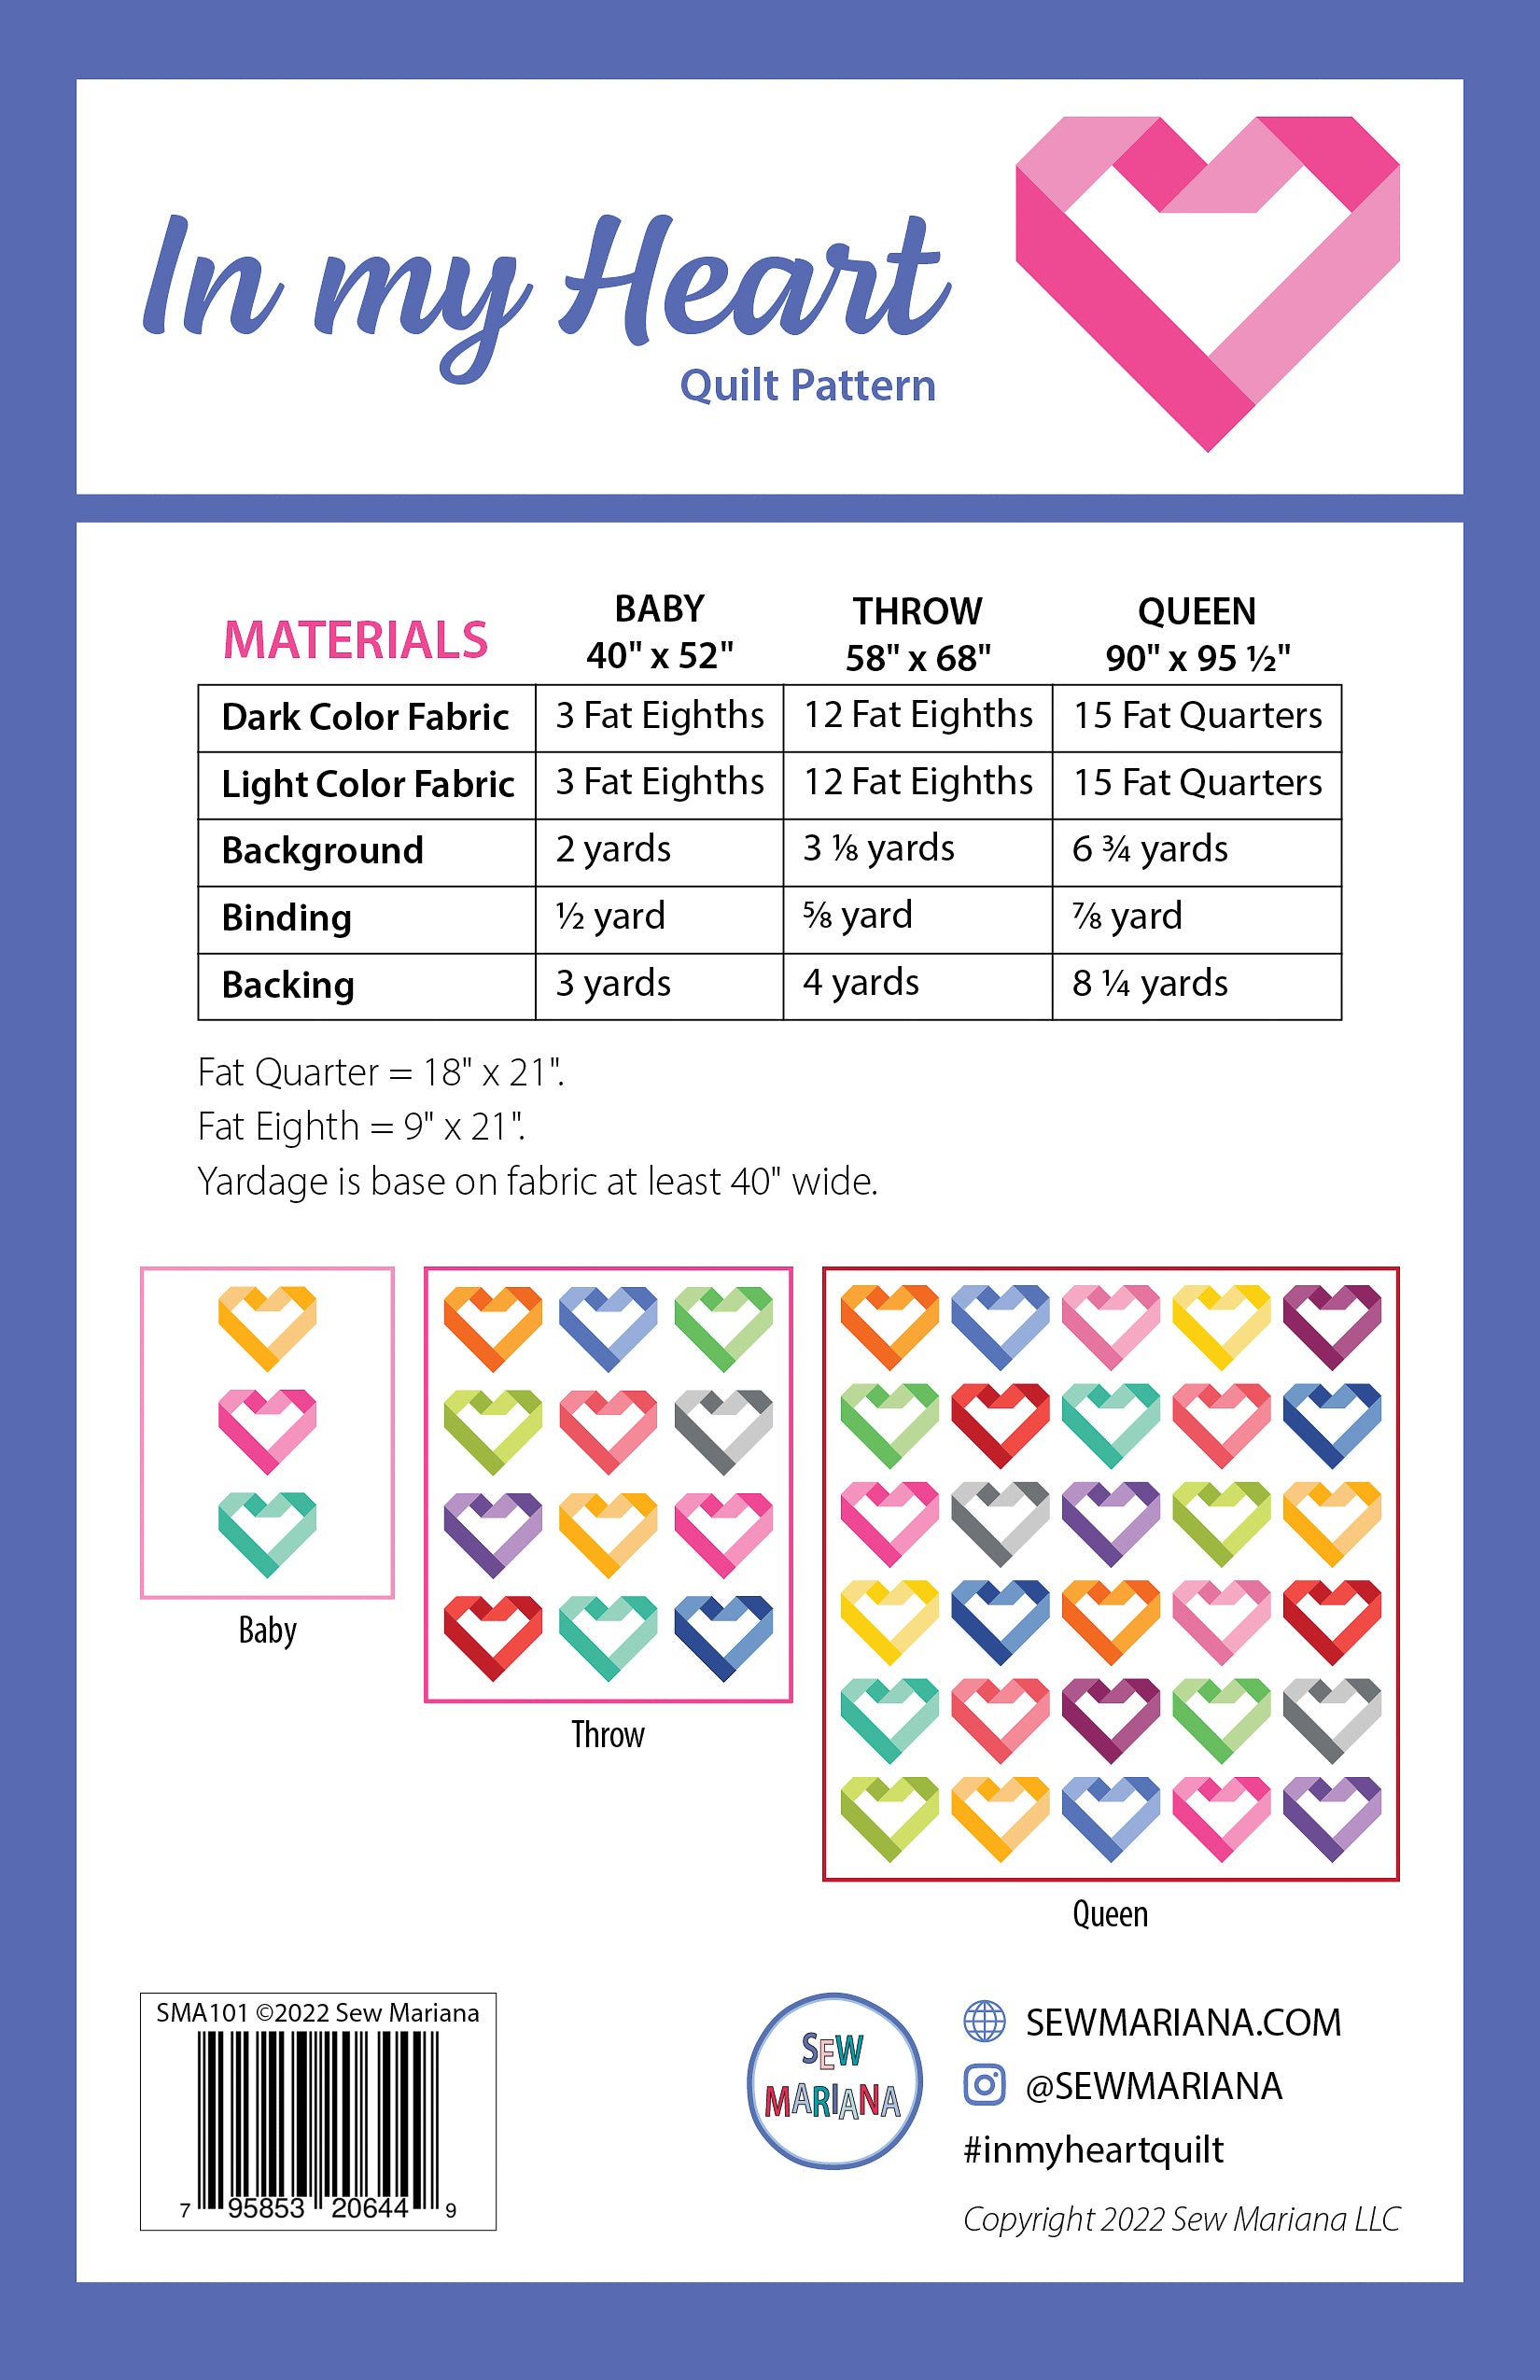 back cover of the in my heart quilt pattern with rainbow graphic of the baby, throw and queen size quilt and a list of the materials